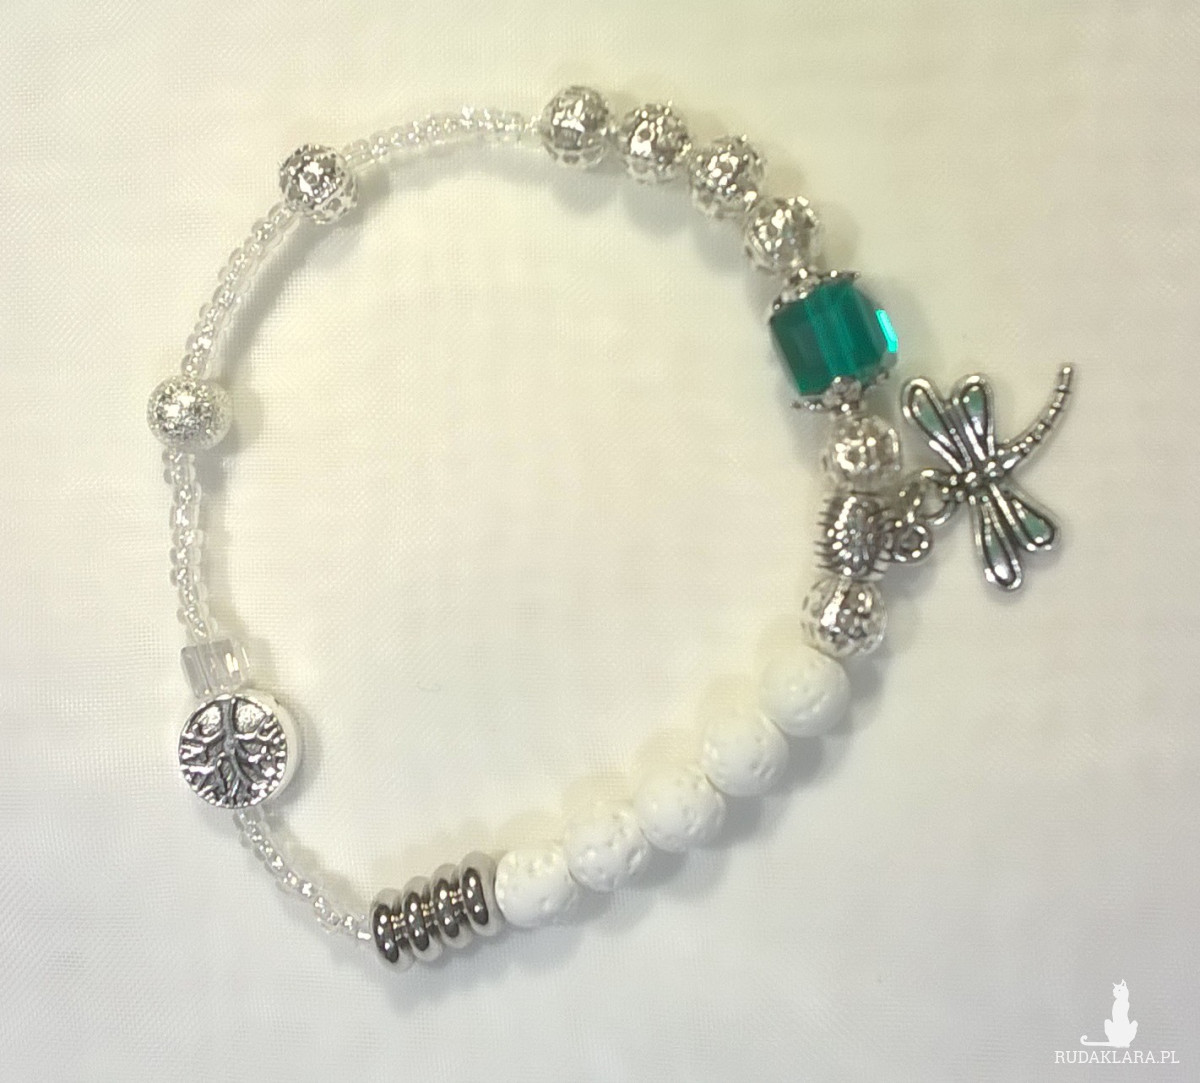 How to Add Charms to a Beaded Bracelet 